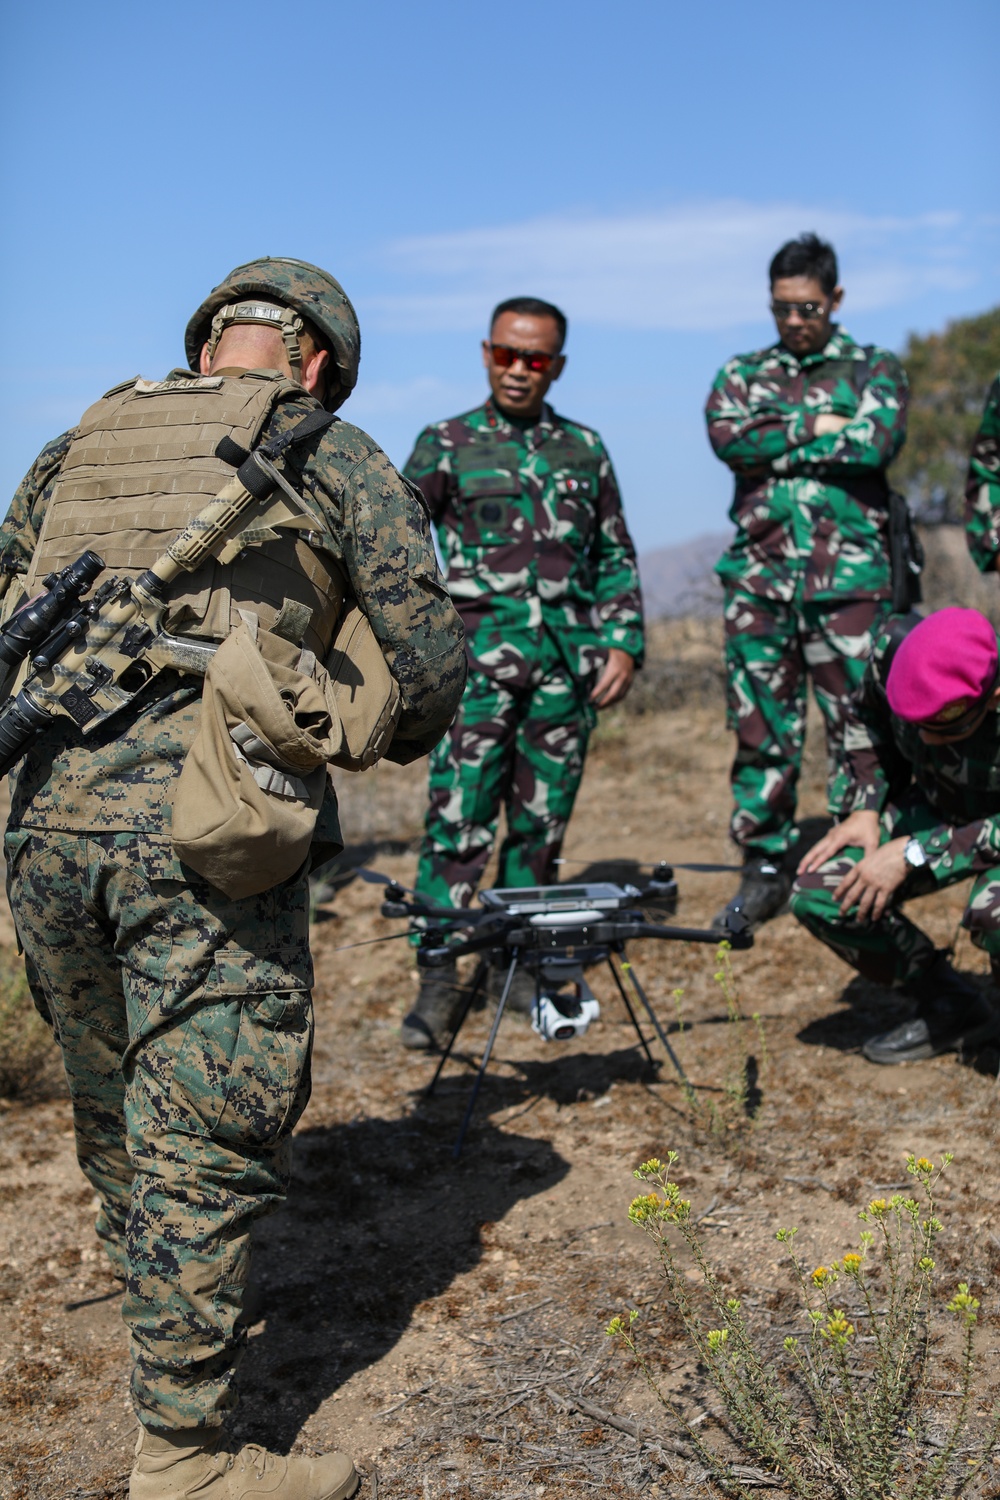 Indonesian military leaders visit 1st Marine Division for a military exchange